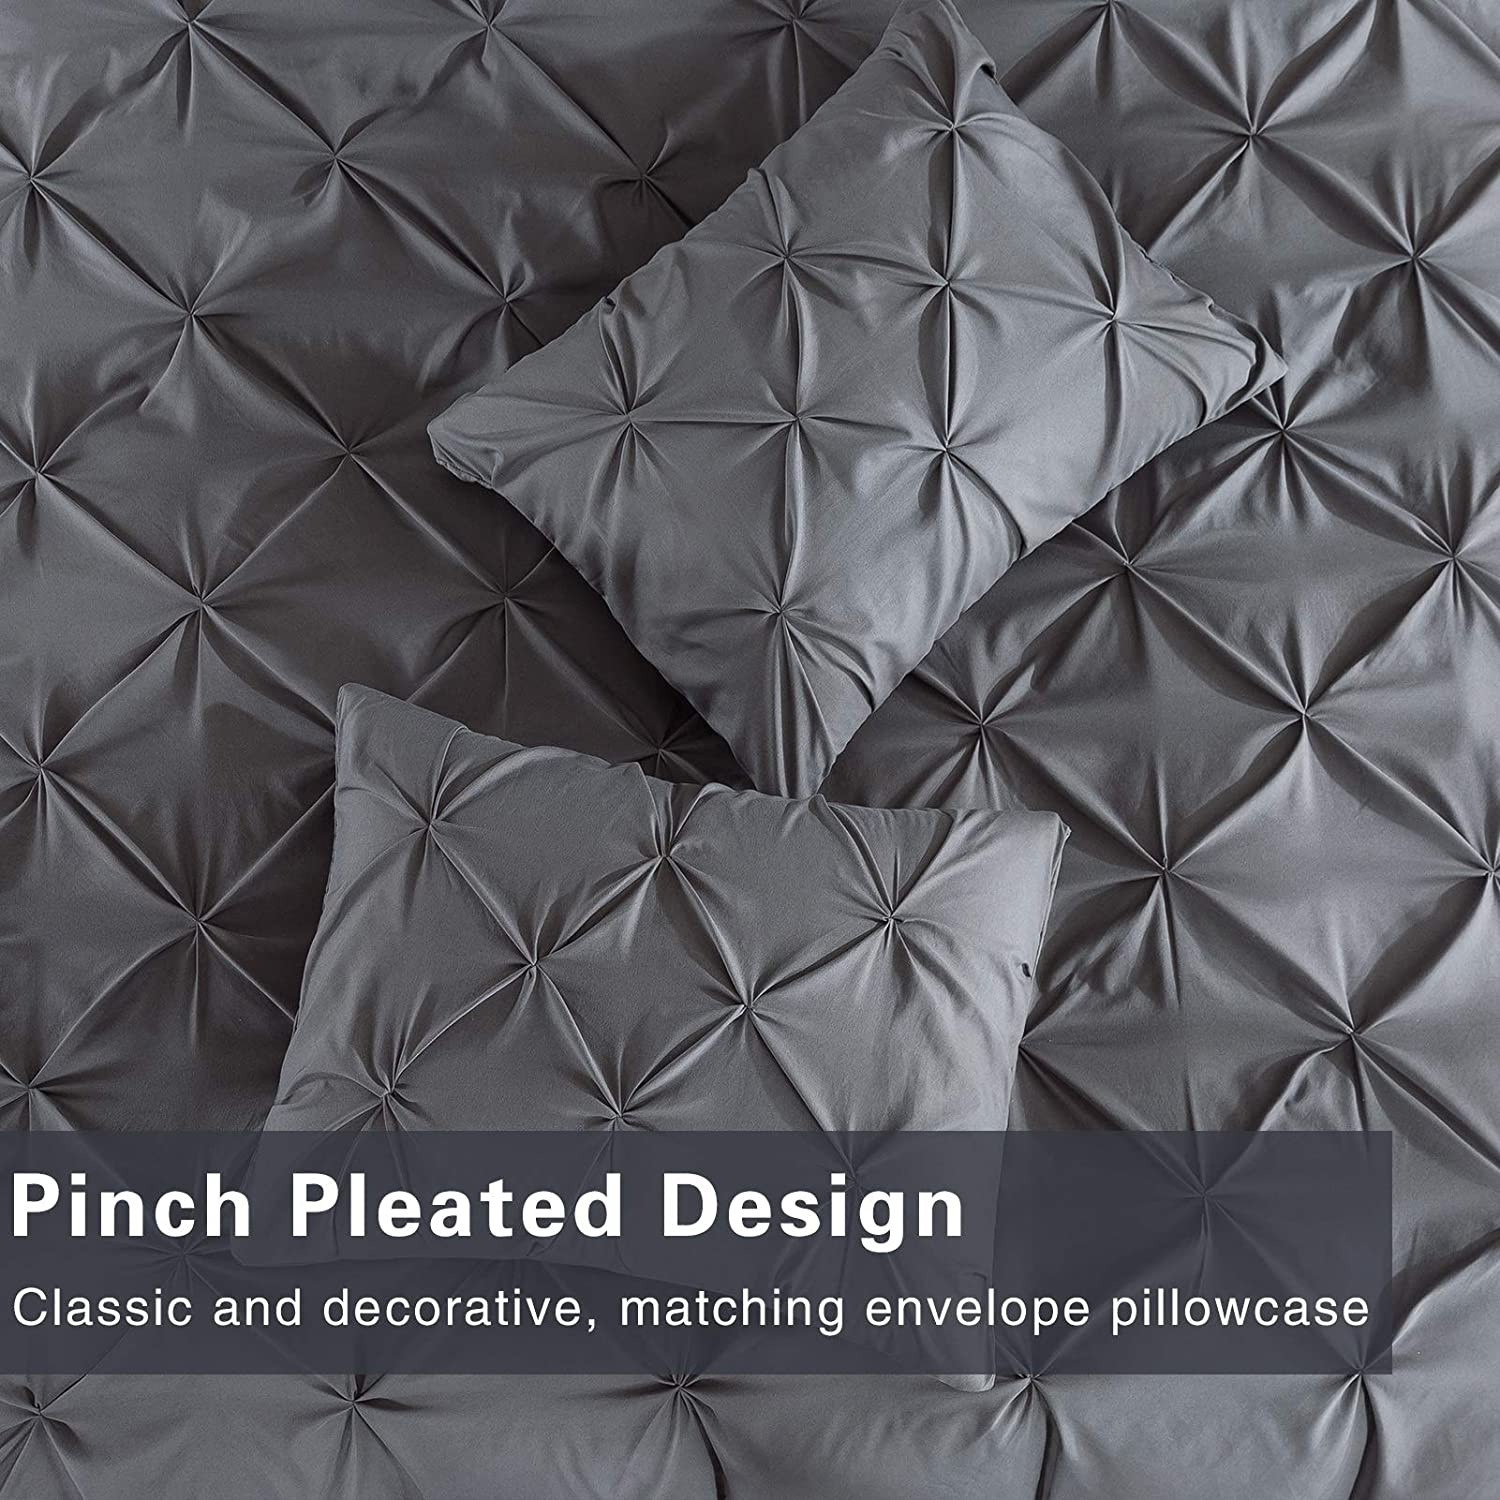 3 pieces Pintuck Pinch Pleated 110gsm Thick Microfiber Duvet Comforter Cover with Zipper Closure